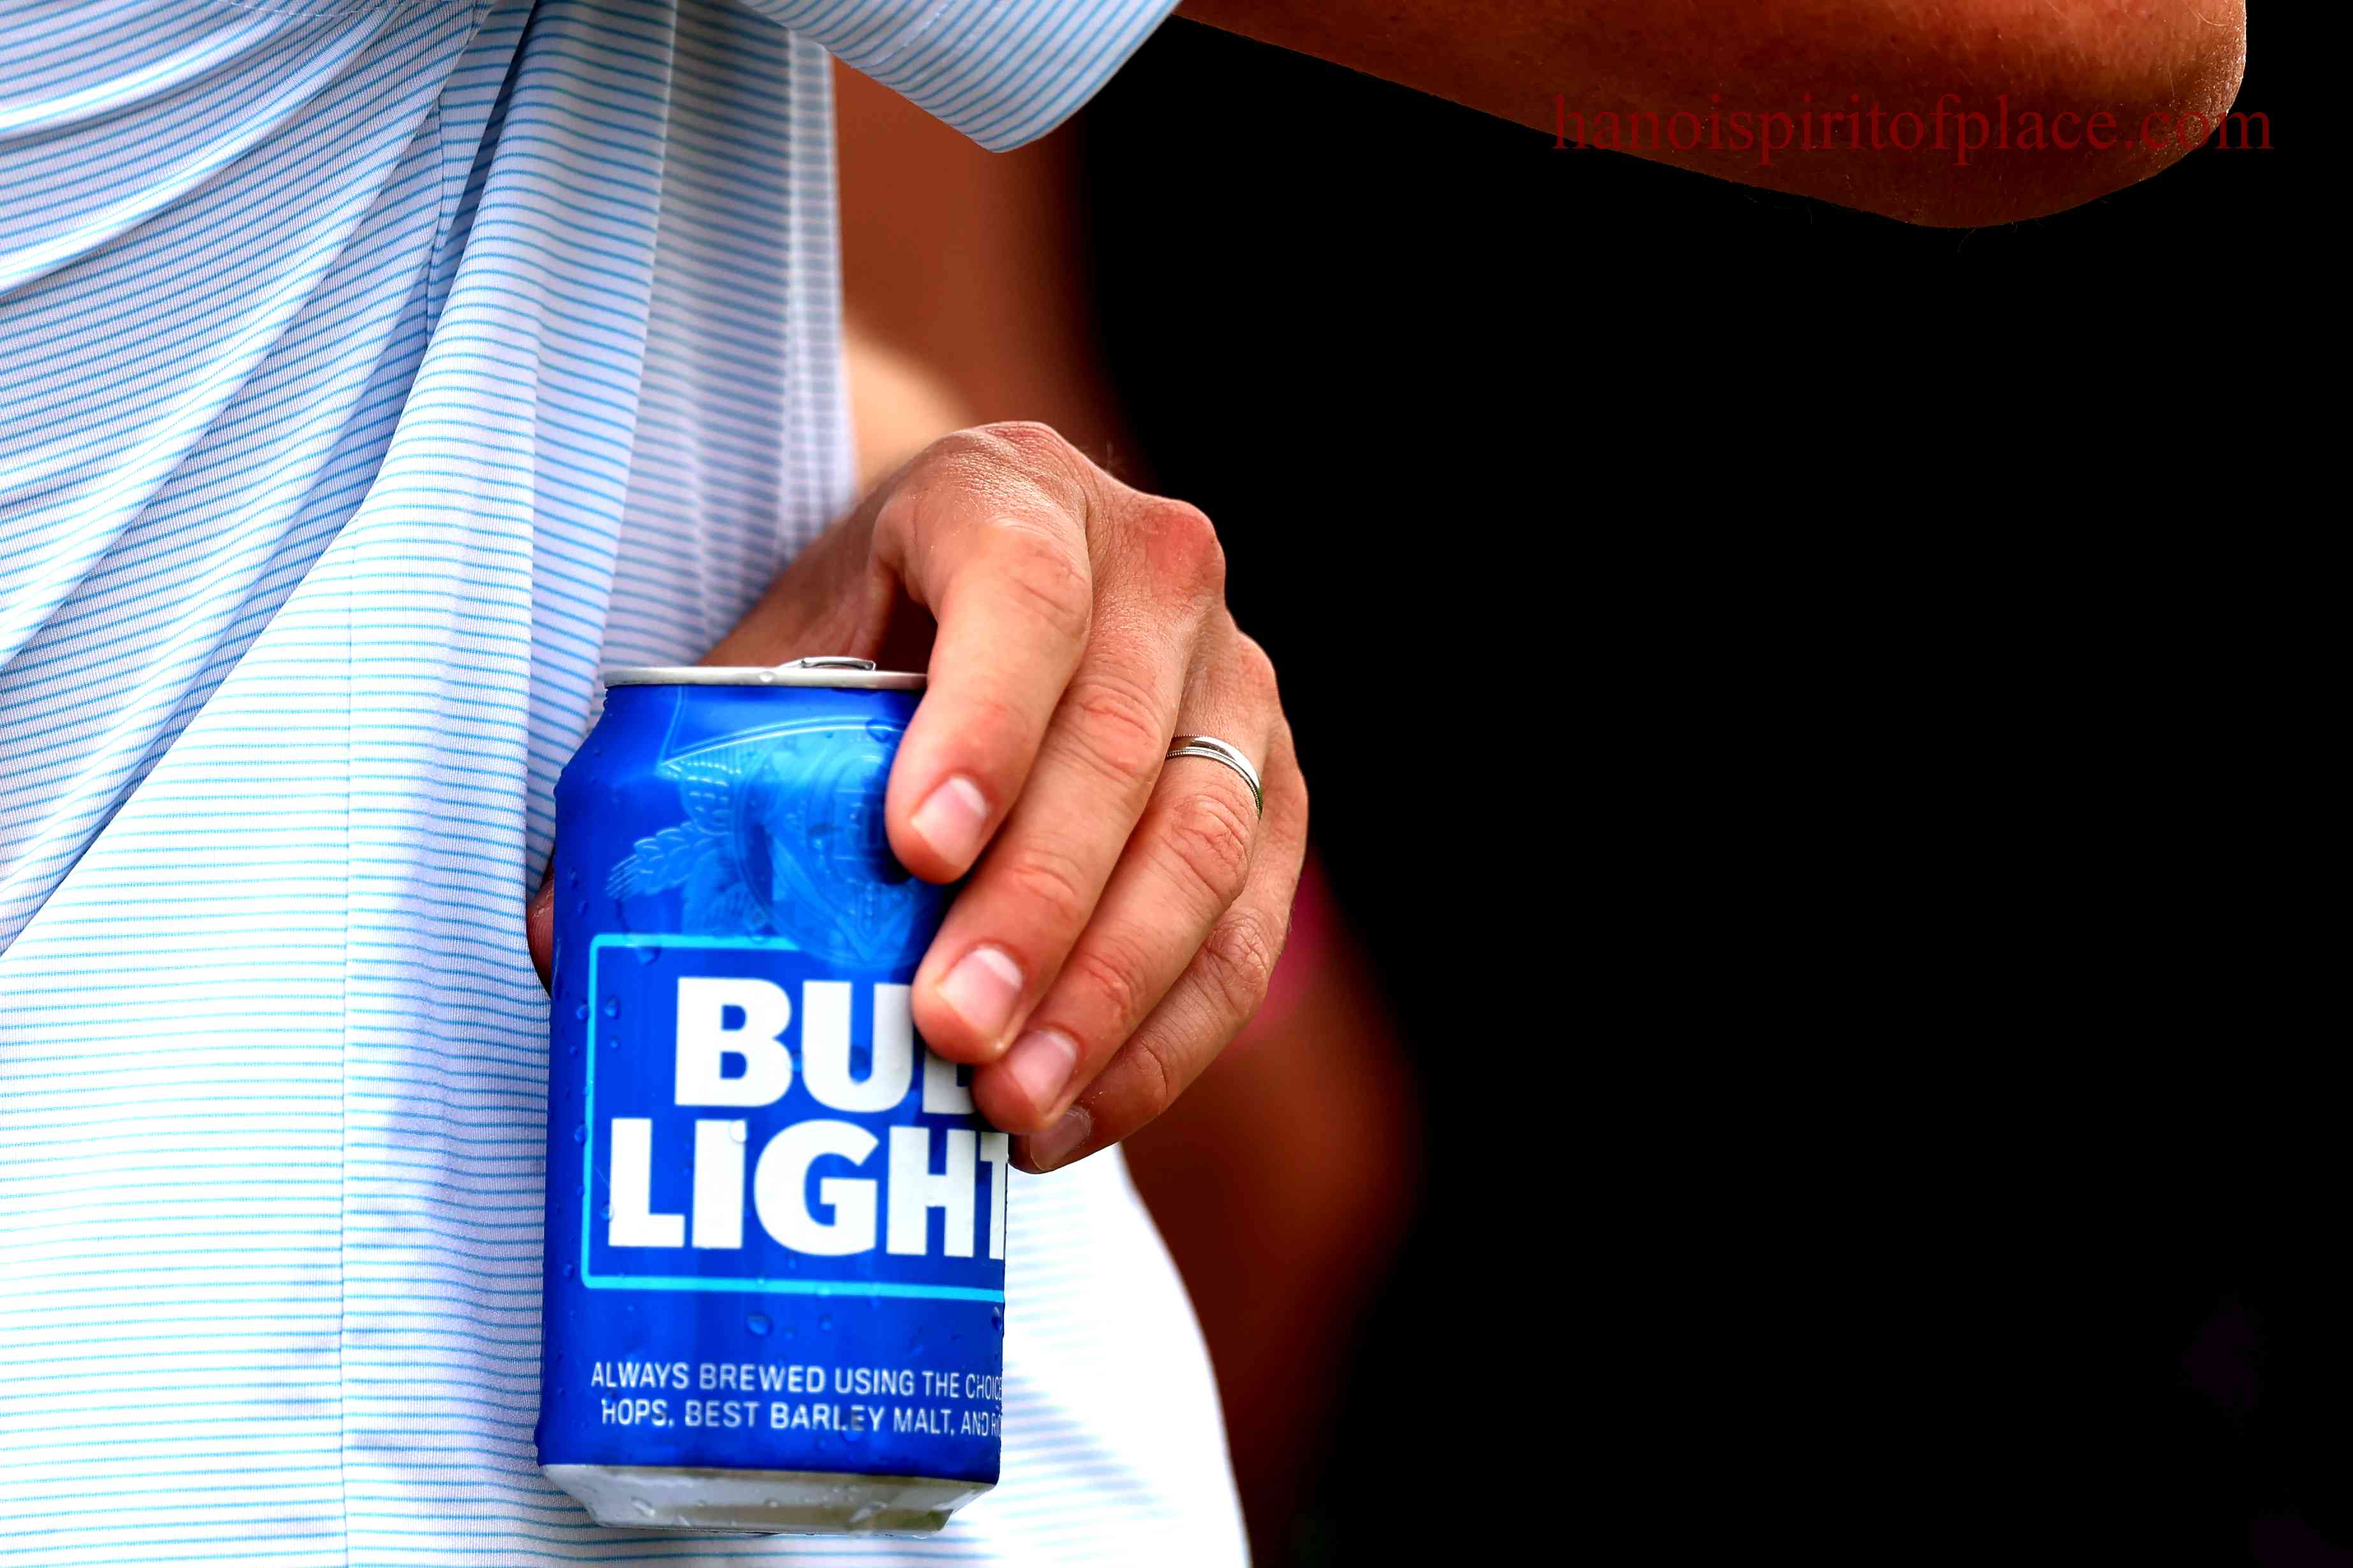 Brief overview of the Bud Light commercial